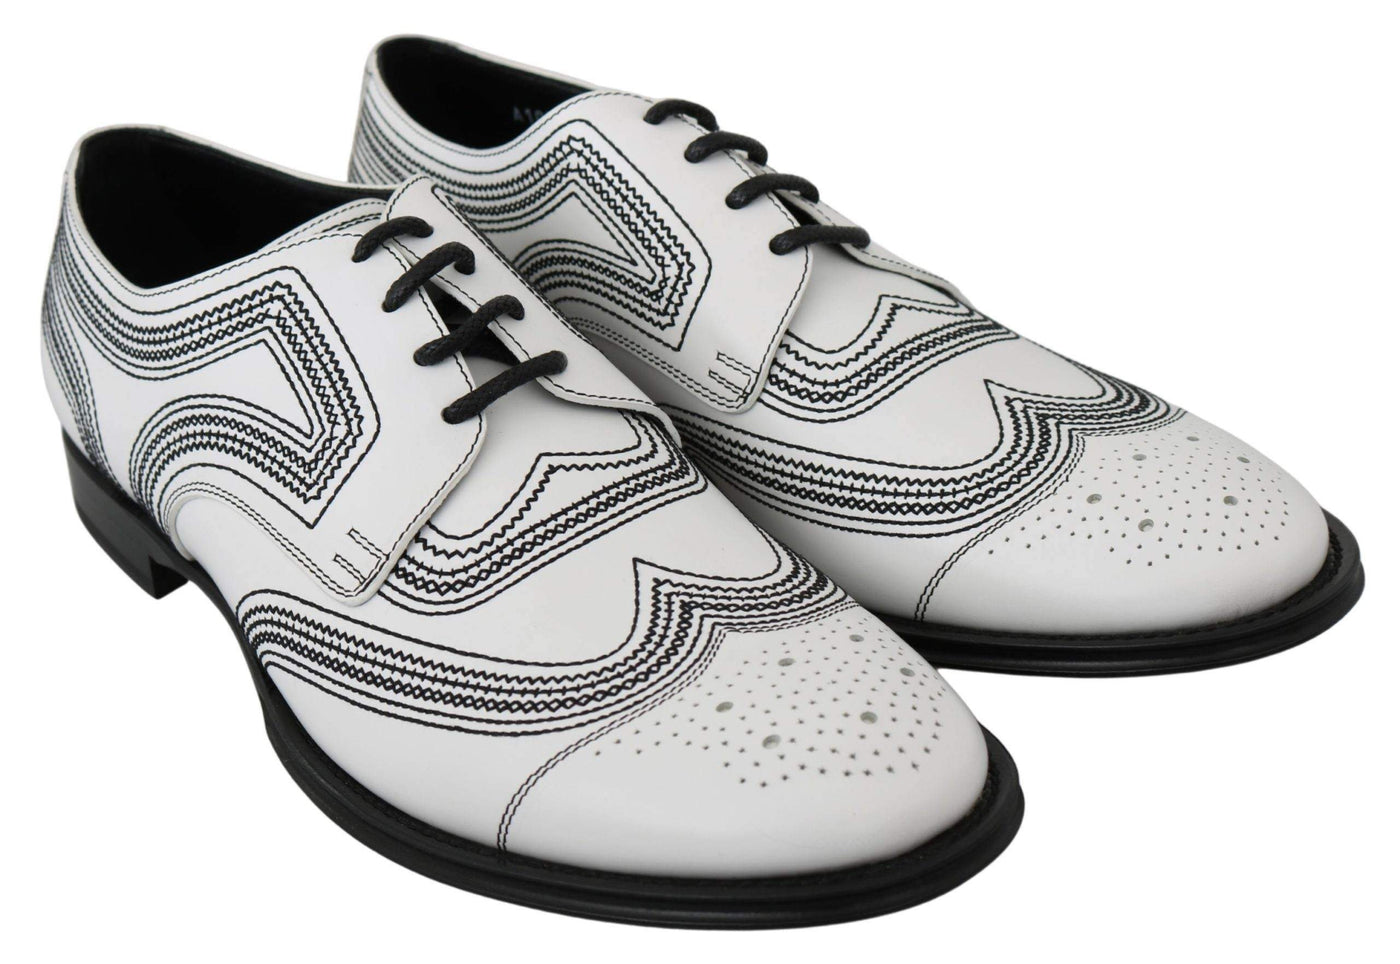 Dolce & Gabbana  White Leather Derby Formal Black Lace Shoes #men, Brand_Dolce & Gabbana, Catch, Category_Shoes, Dolce & Gabbana, EU44/US11, feed-agegroup-adult, feed-color-white, feed-gender-male, feed-size-US11, Formal - Men - Shoes, Gender_Men, Kogan, Shoes - New Arrivals, White at SEYMAYKA